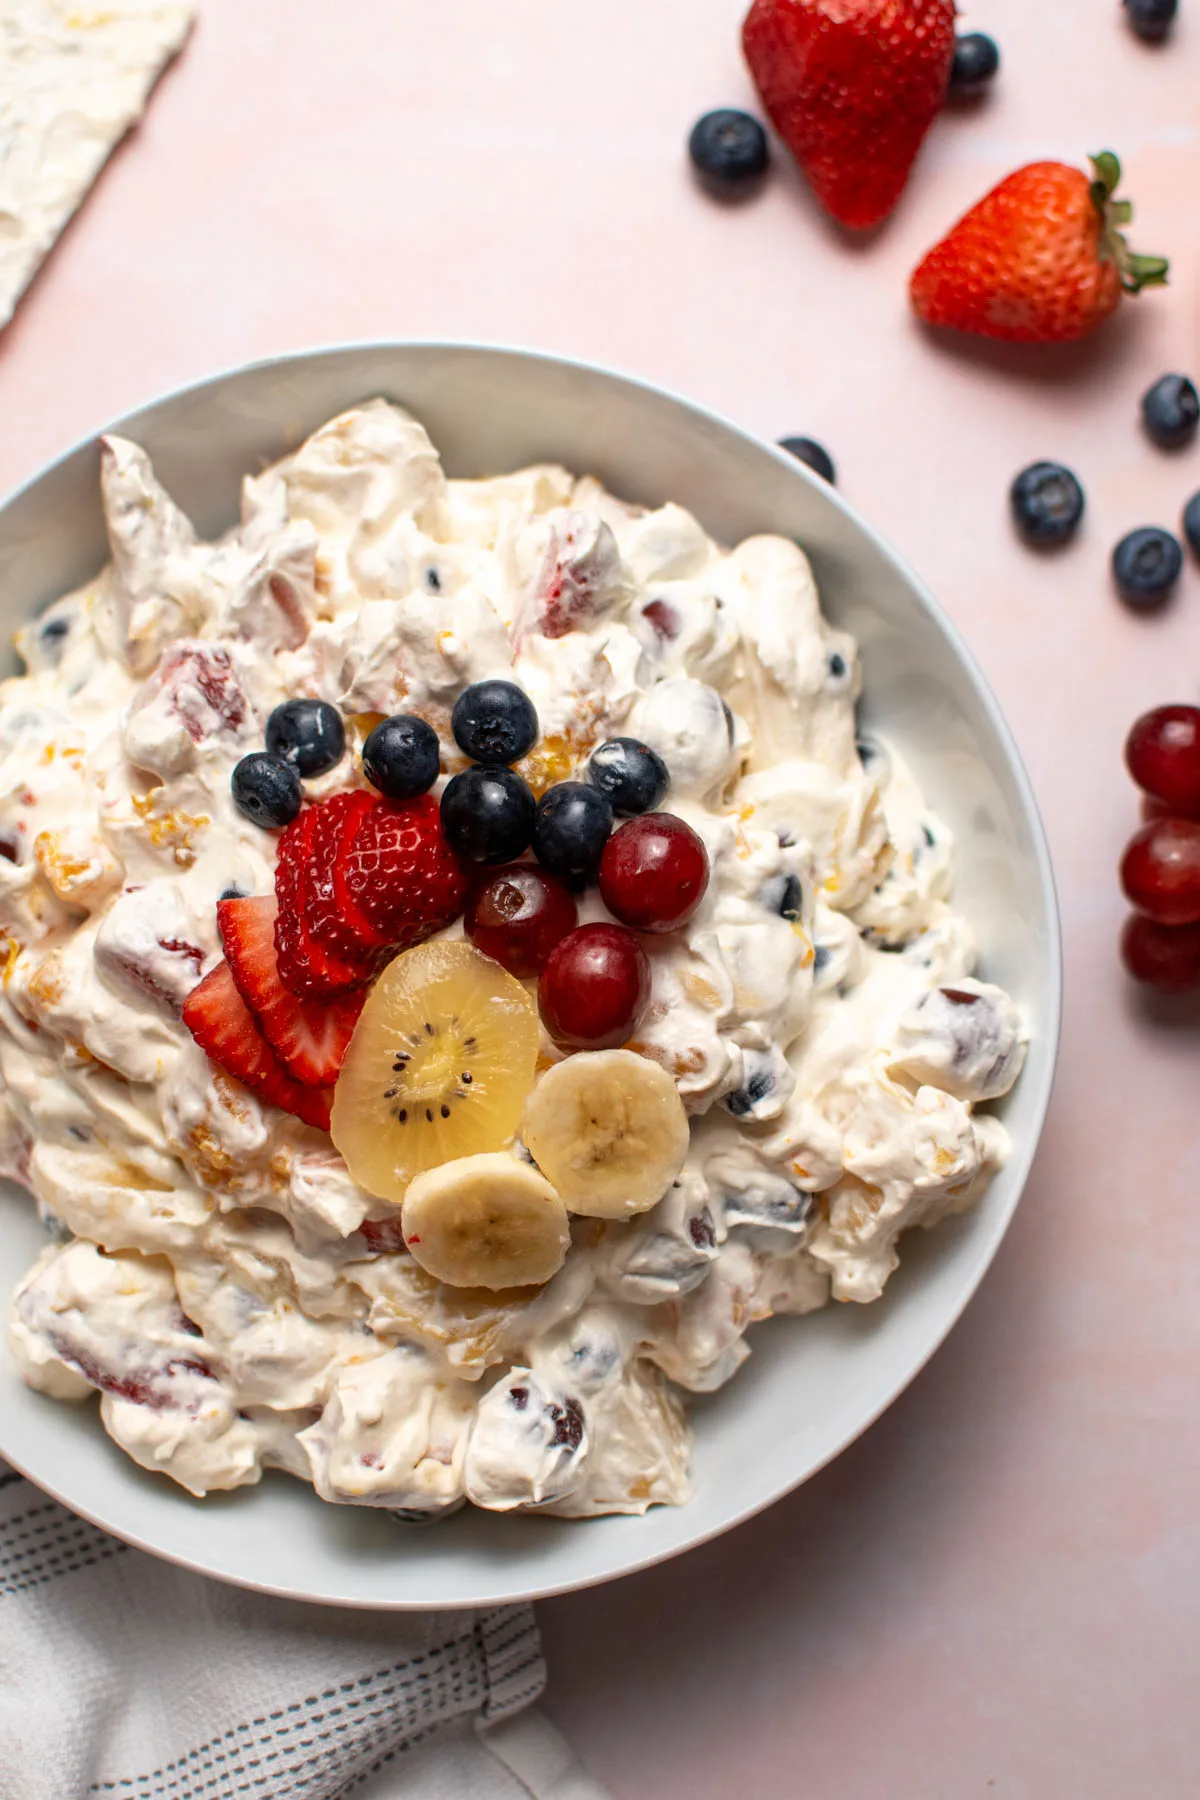 Creamy fruit salad topped with fresh fruit in white bowl.